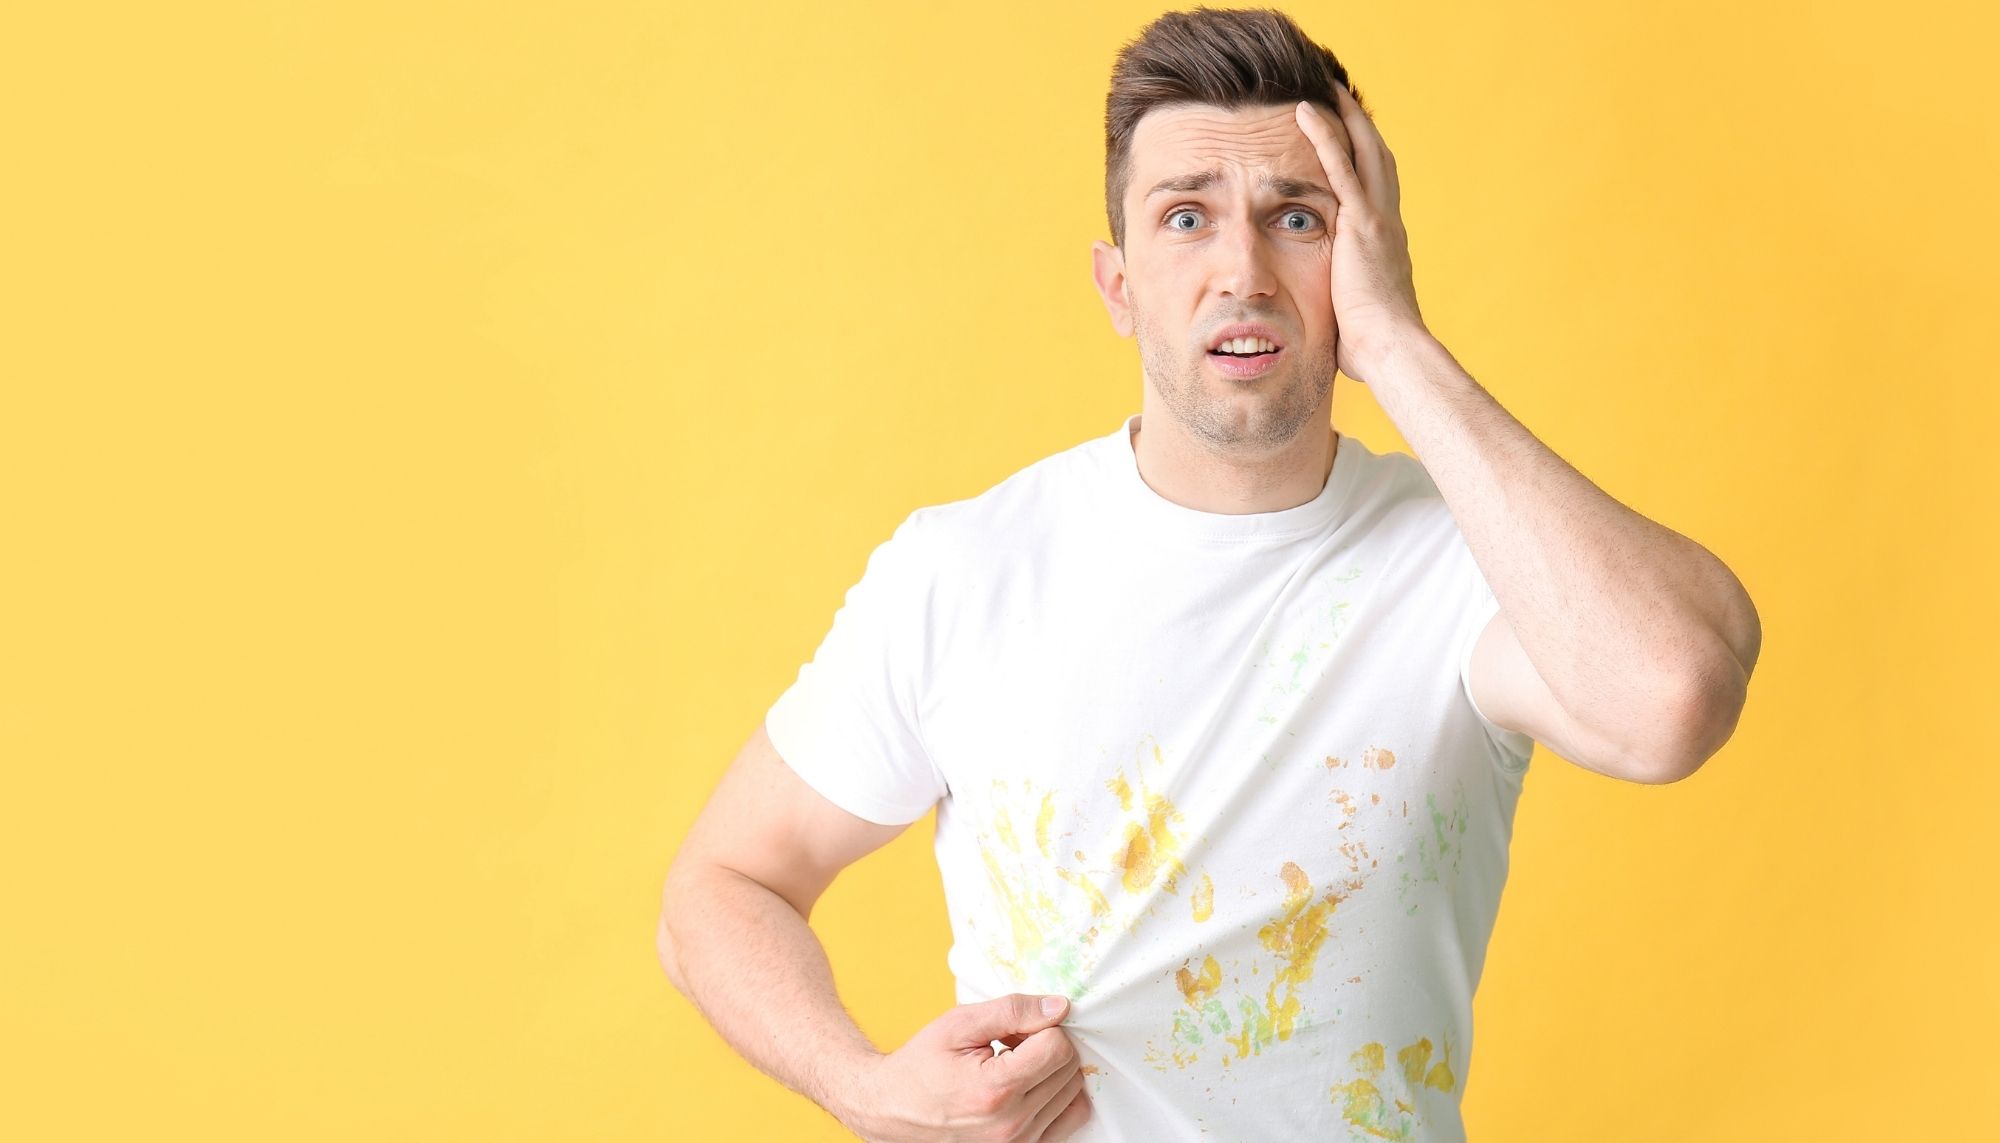 Confused white male with food stains on his shirt